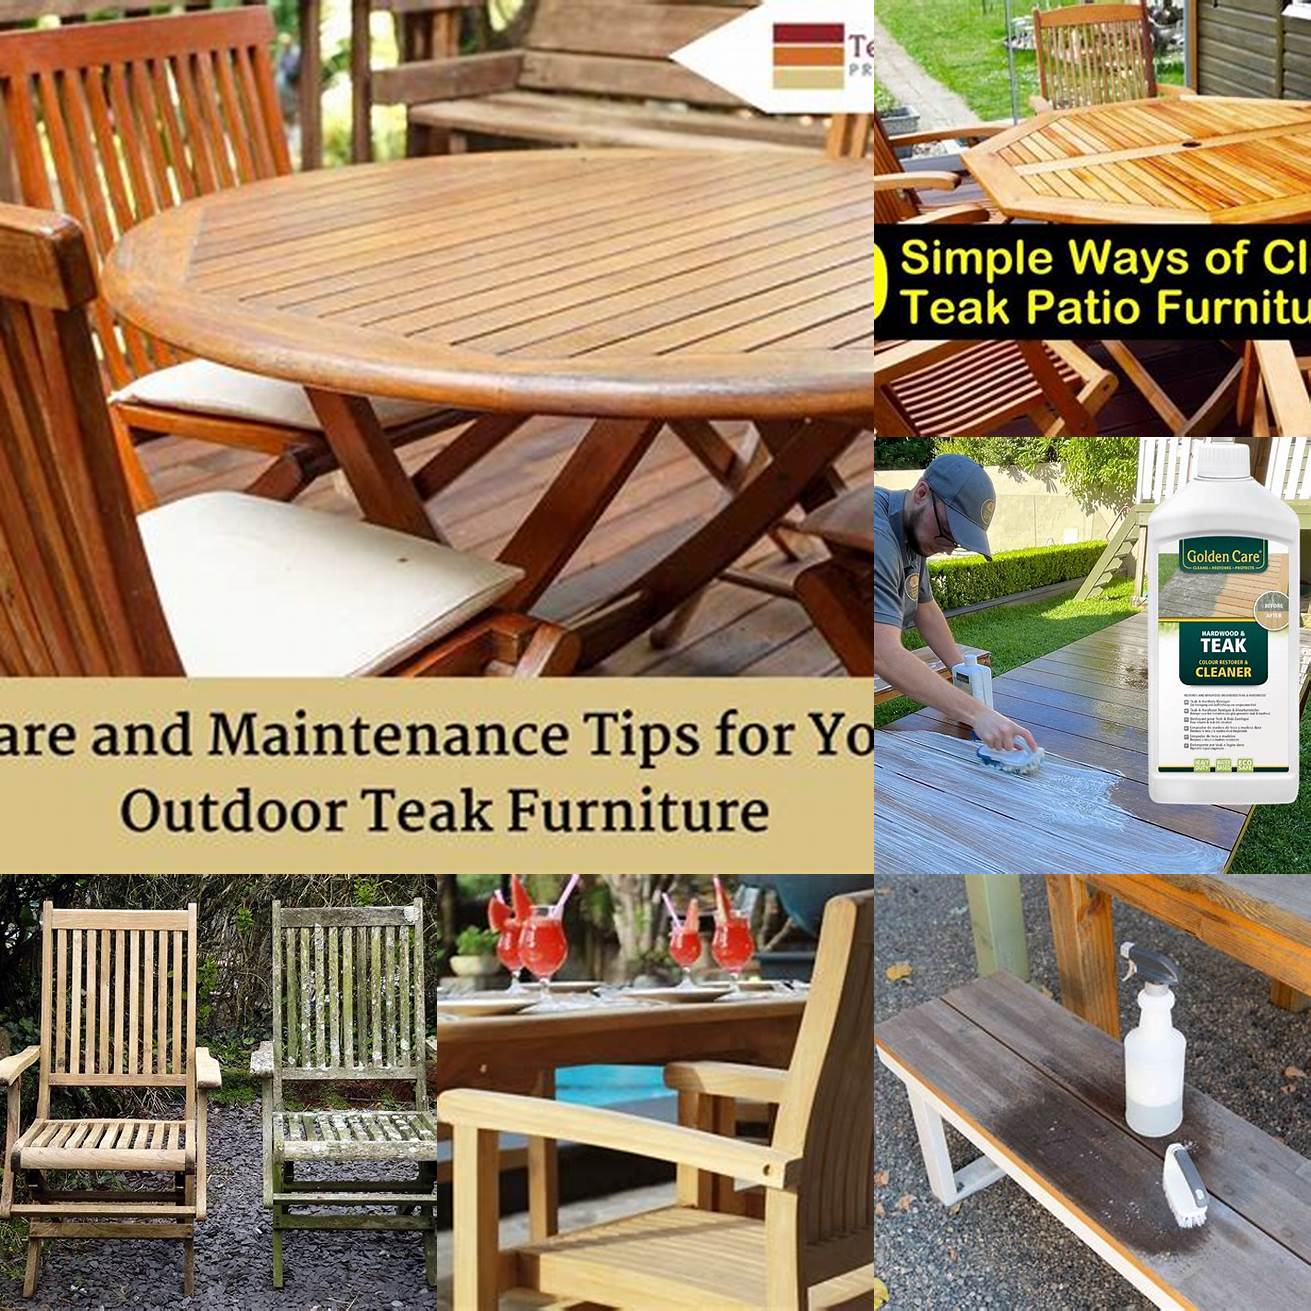 Tips for Cleaning Teak Furniture